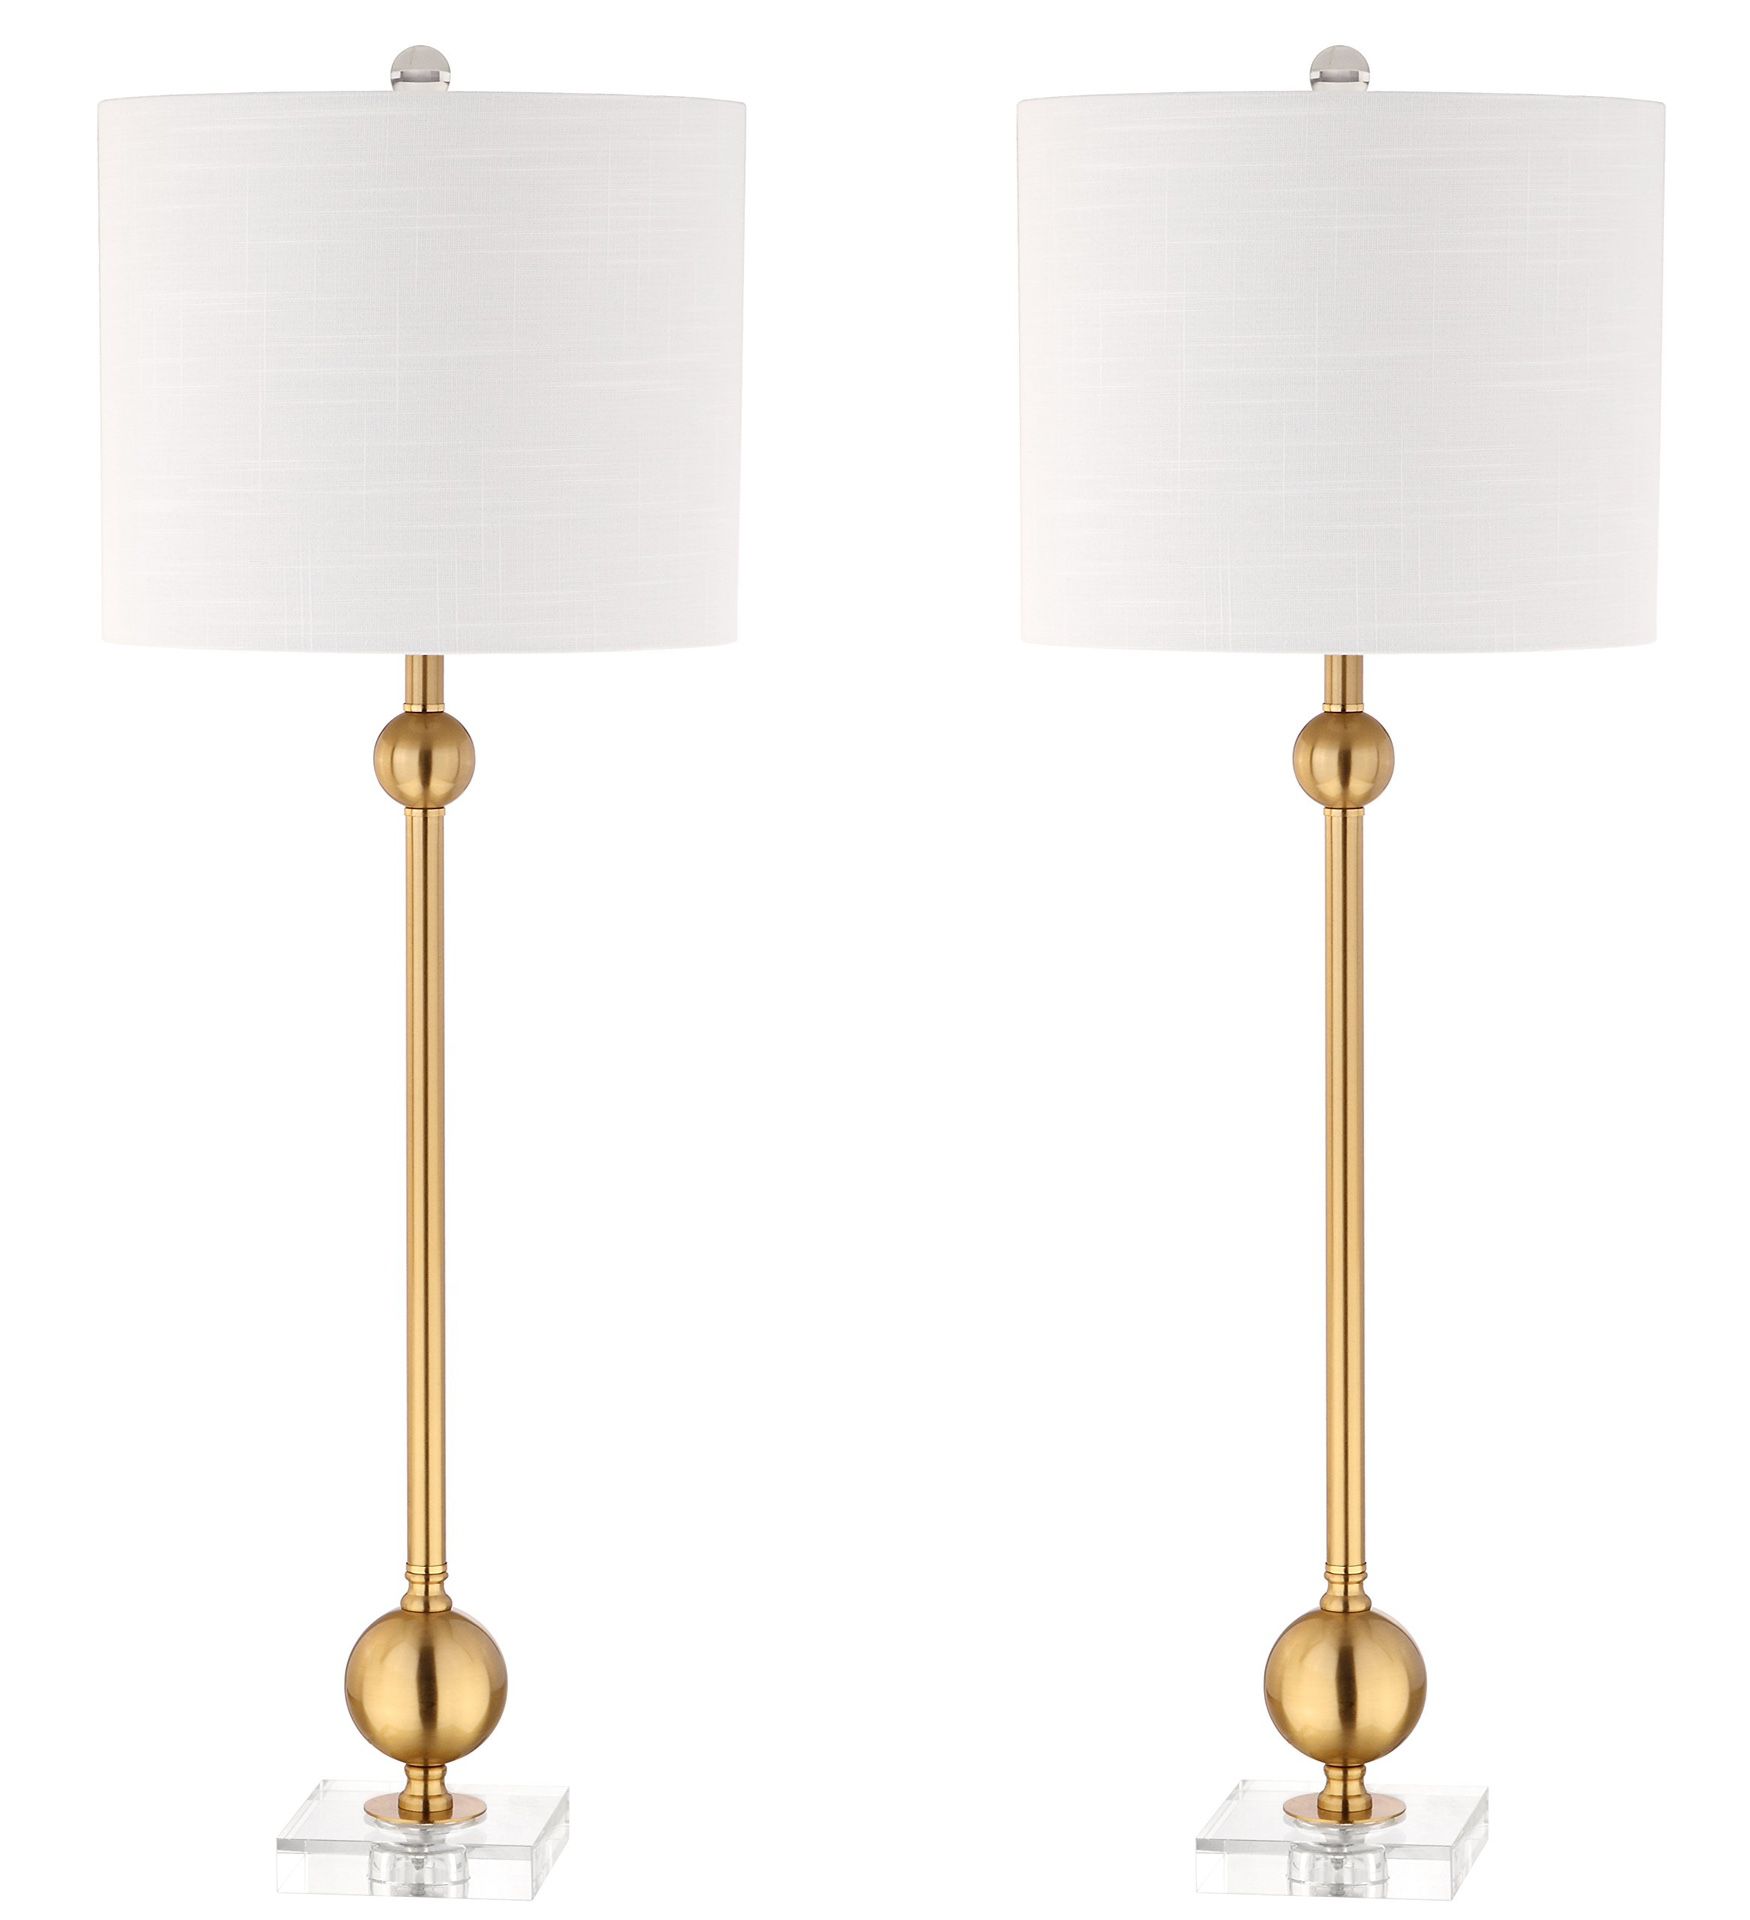 NEW! Hollis 34" Metal LED Table Lamp, Brass with Crystal Base (Set of 2) by JONATHAN Y